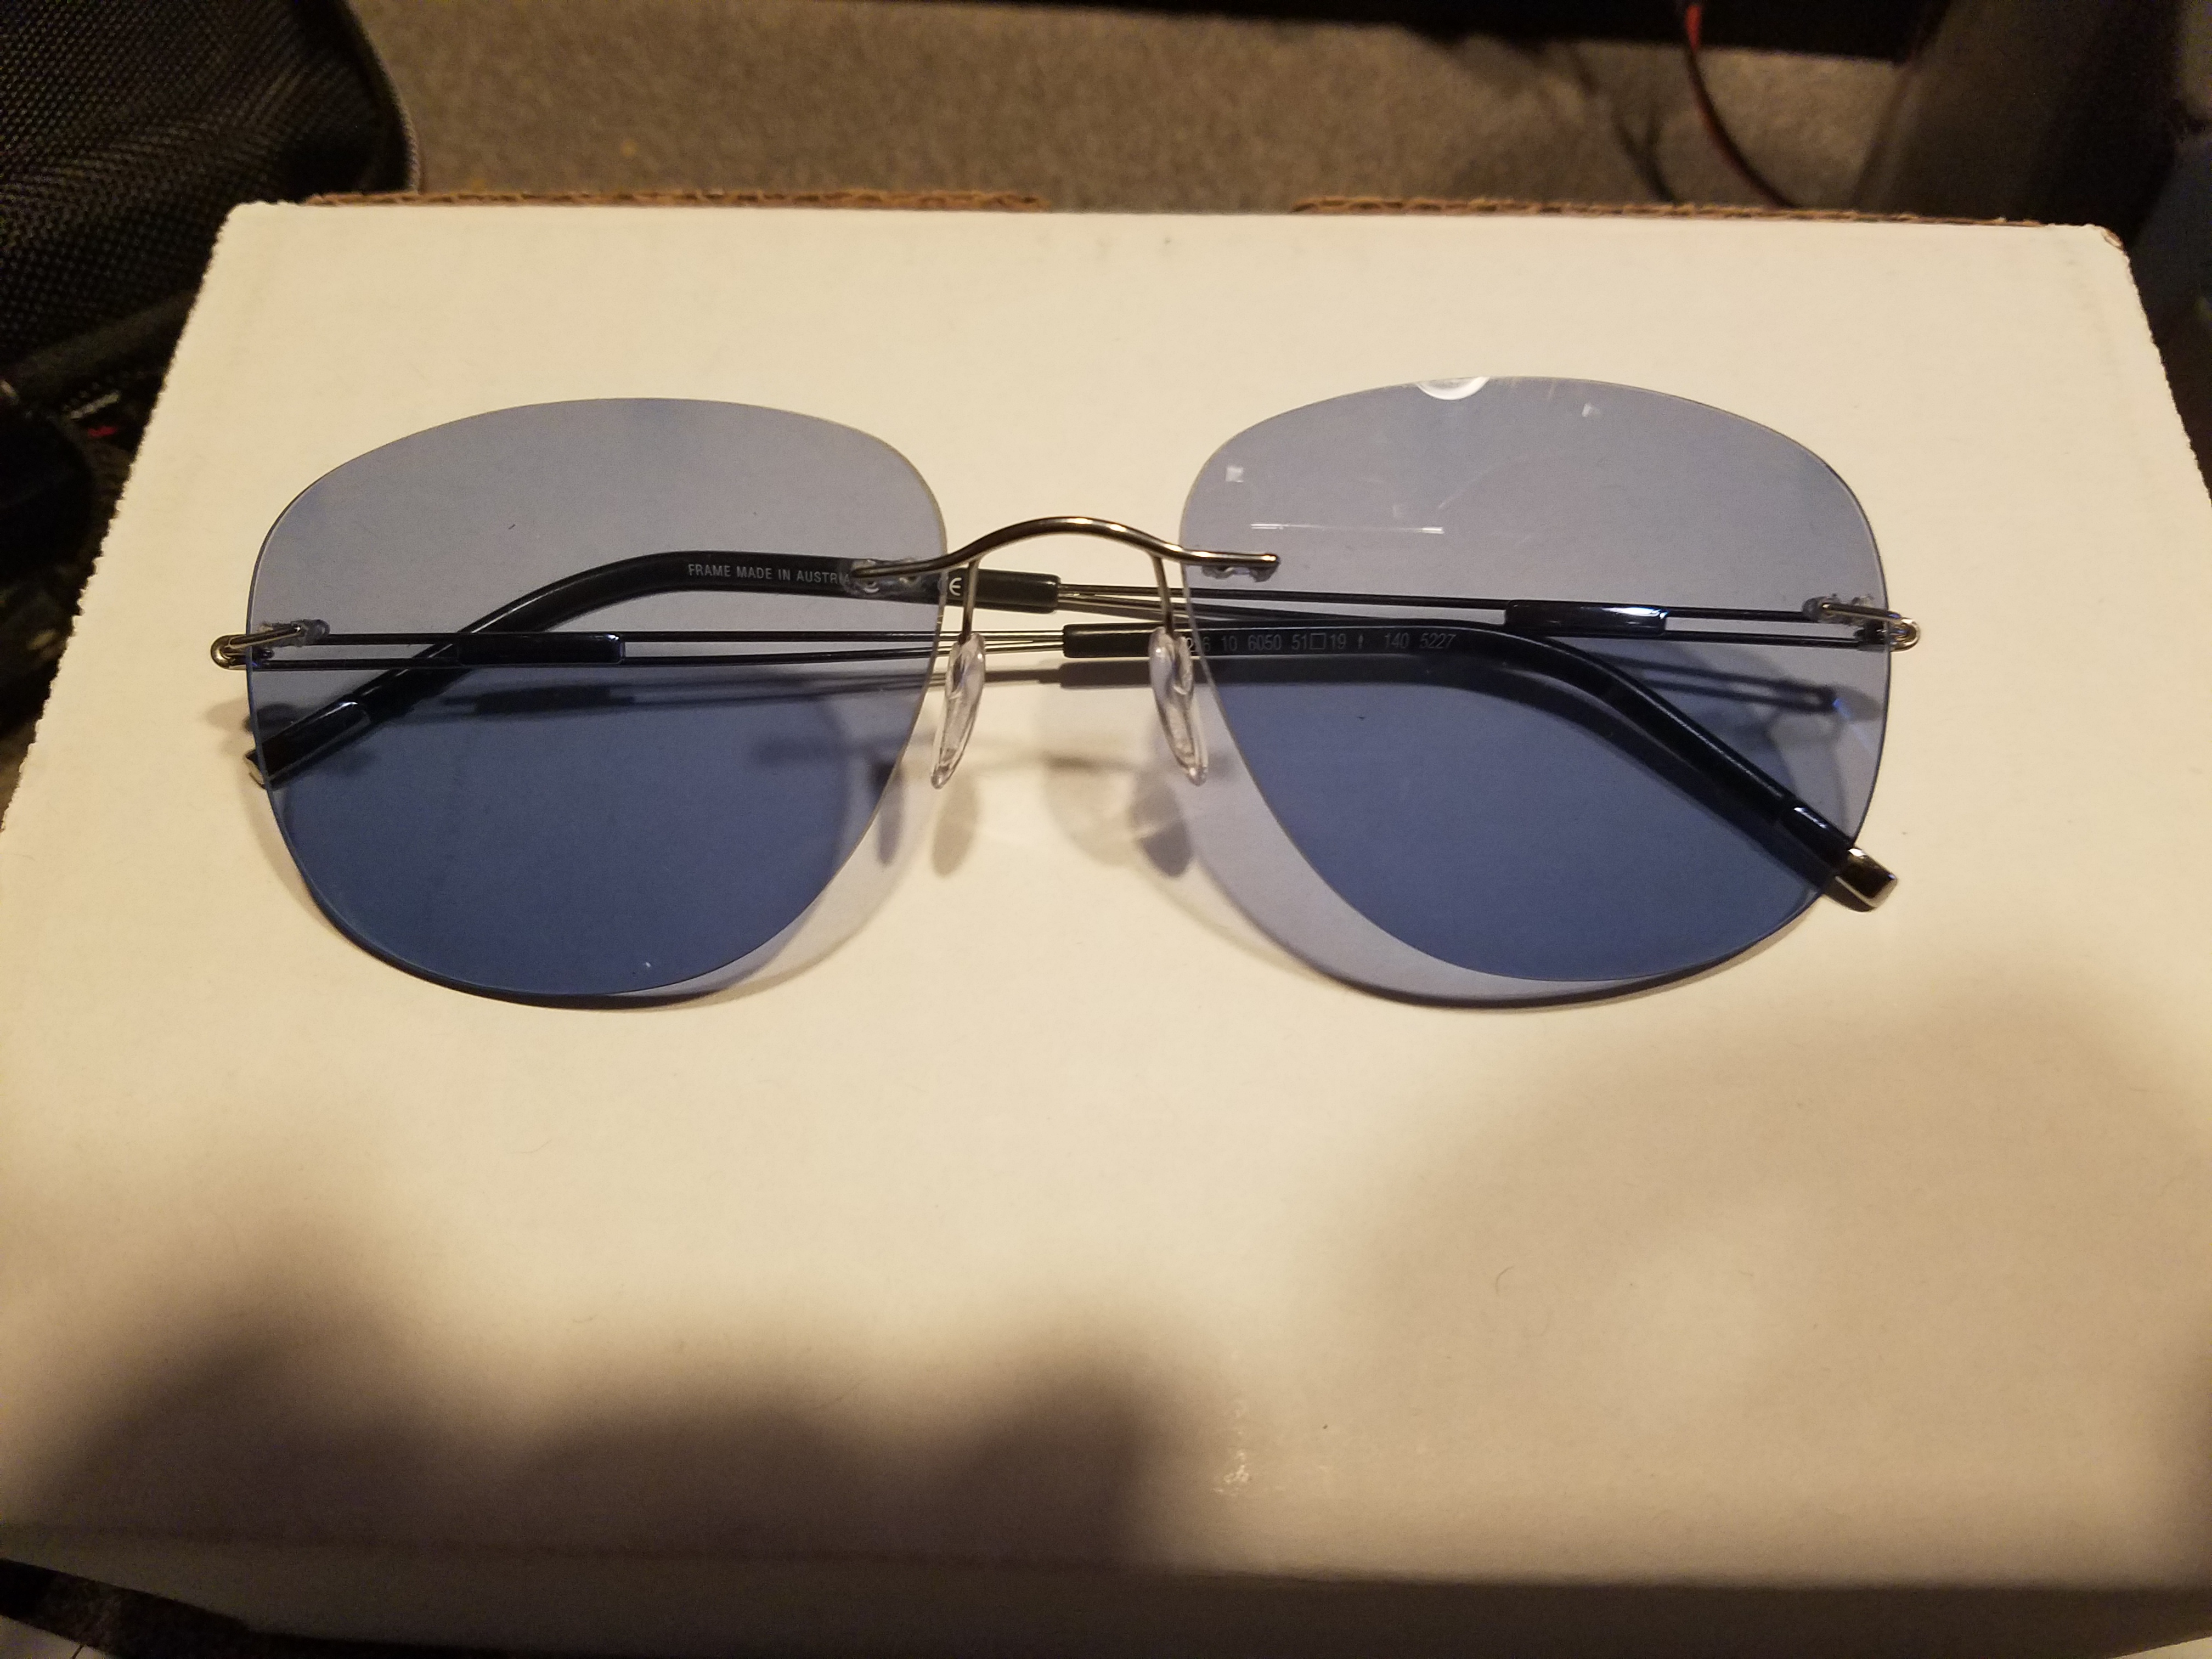 Can't find Tony Stark's sunglasses from Iron Man 3 | Page 22 | RPF Costume  and Prop Maker Community